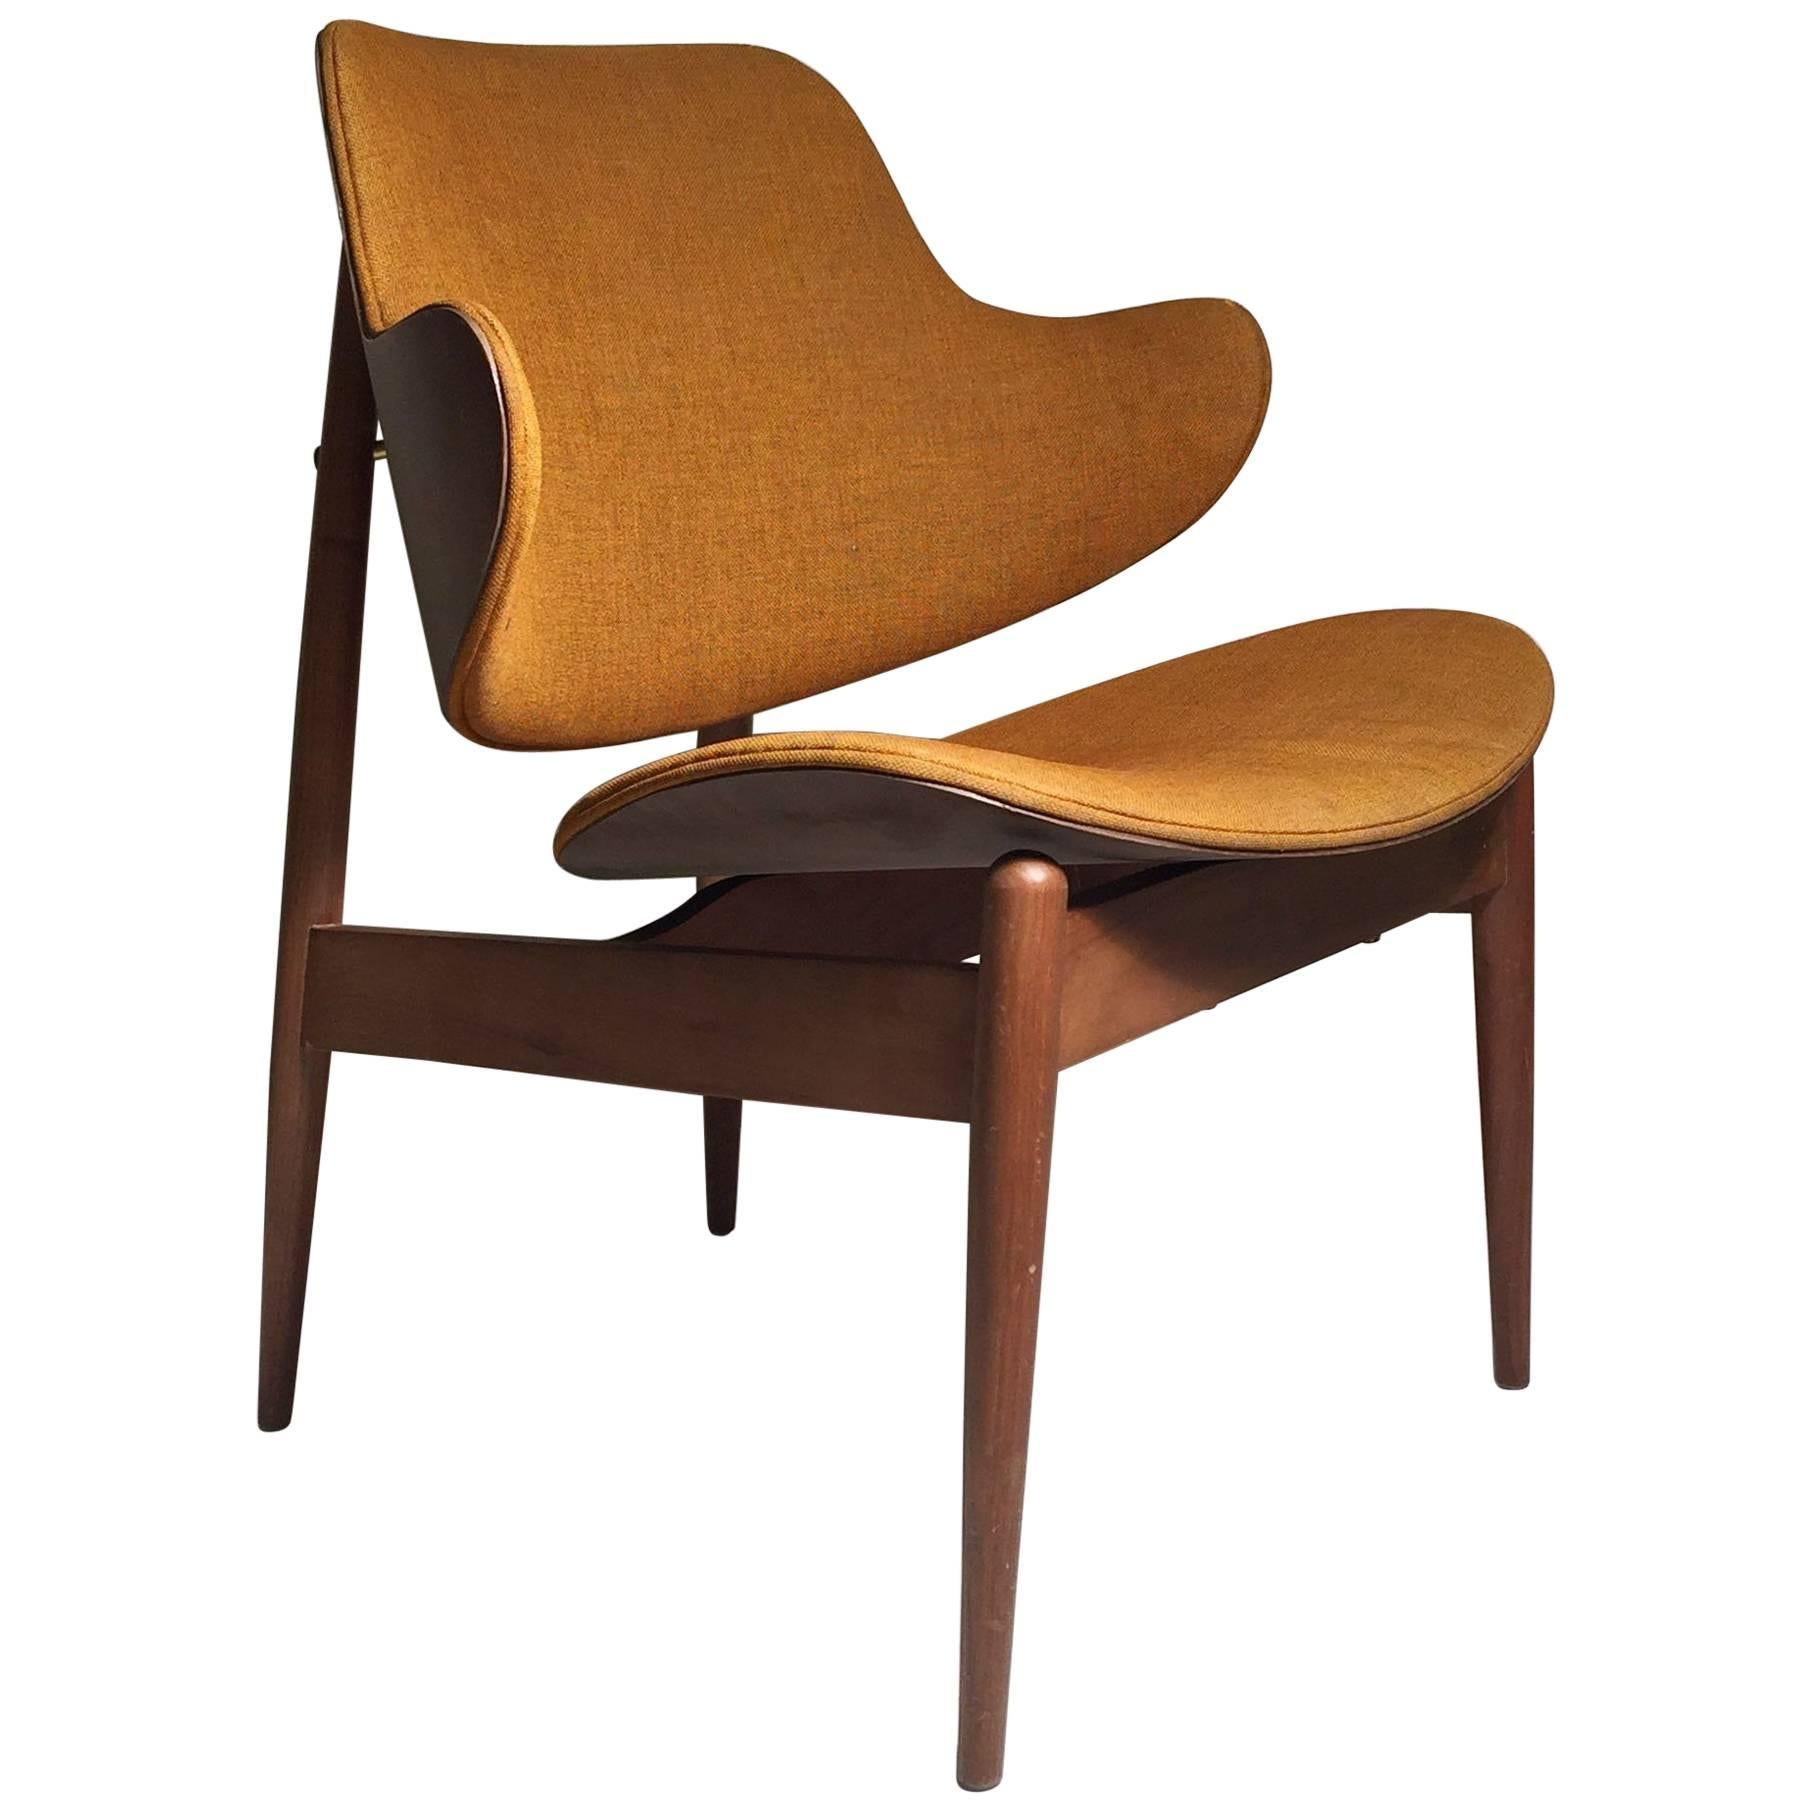 Vintage Kodawood Lounge Chair by Seymour James Weiner